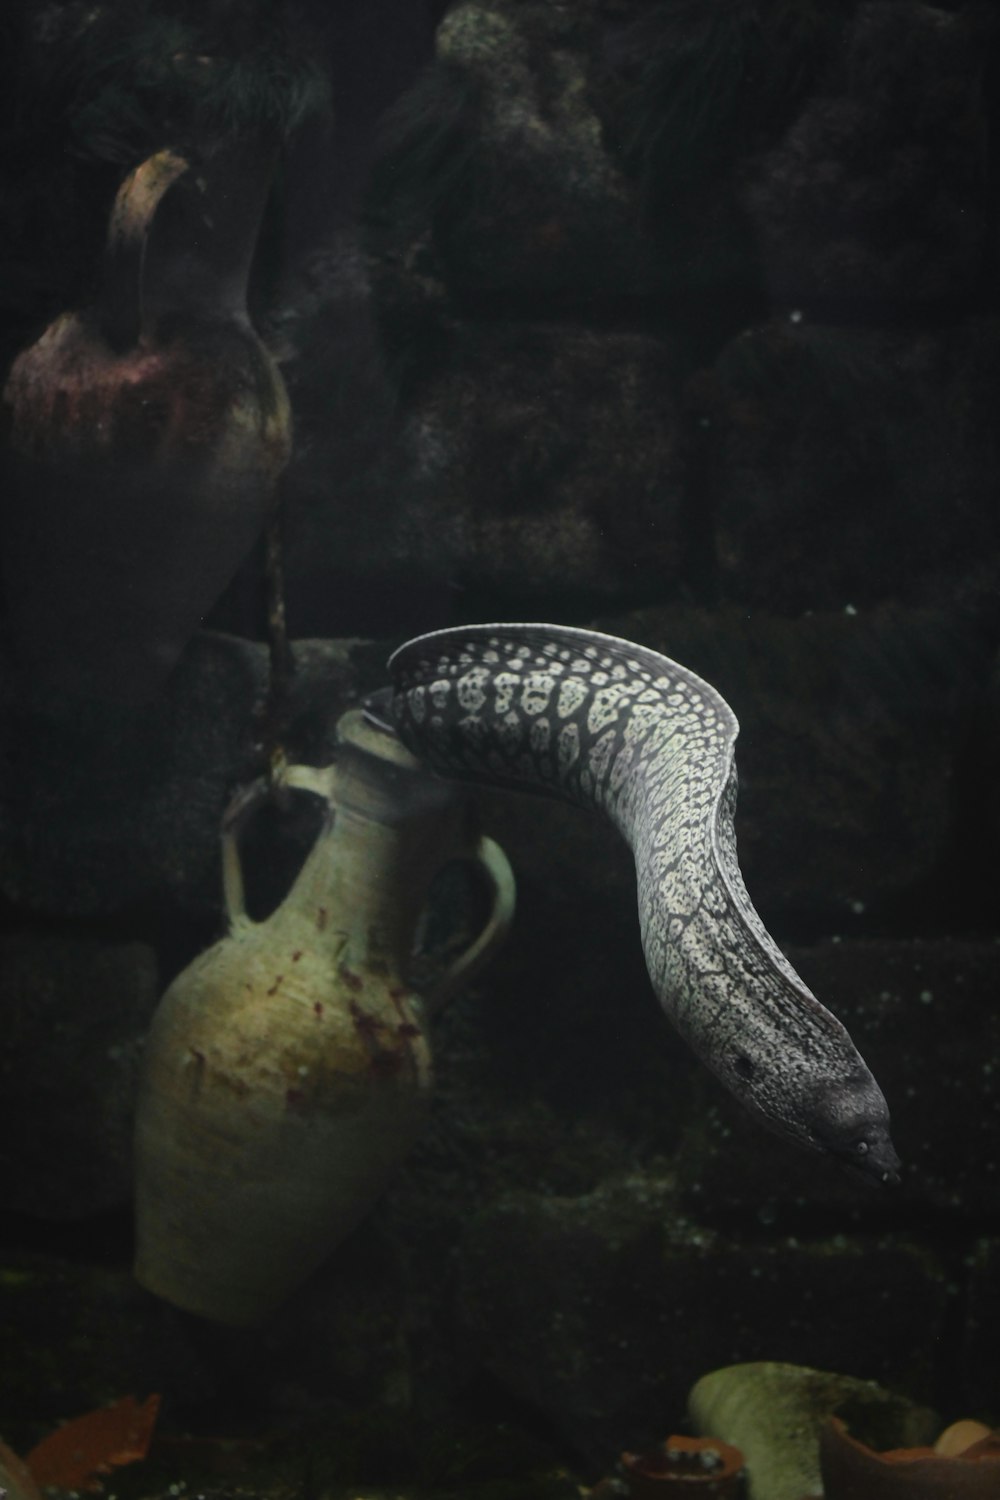 a pitcher and a snake in an aquarium